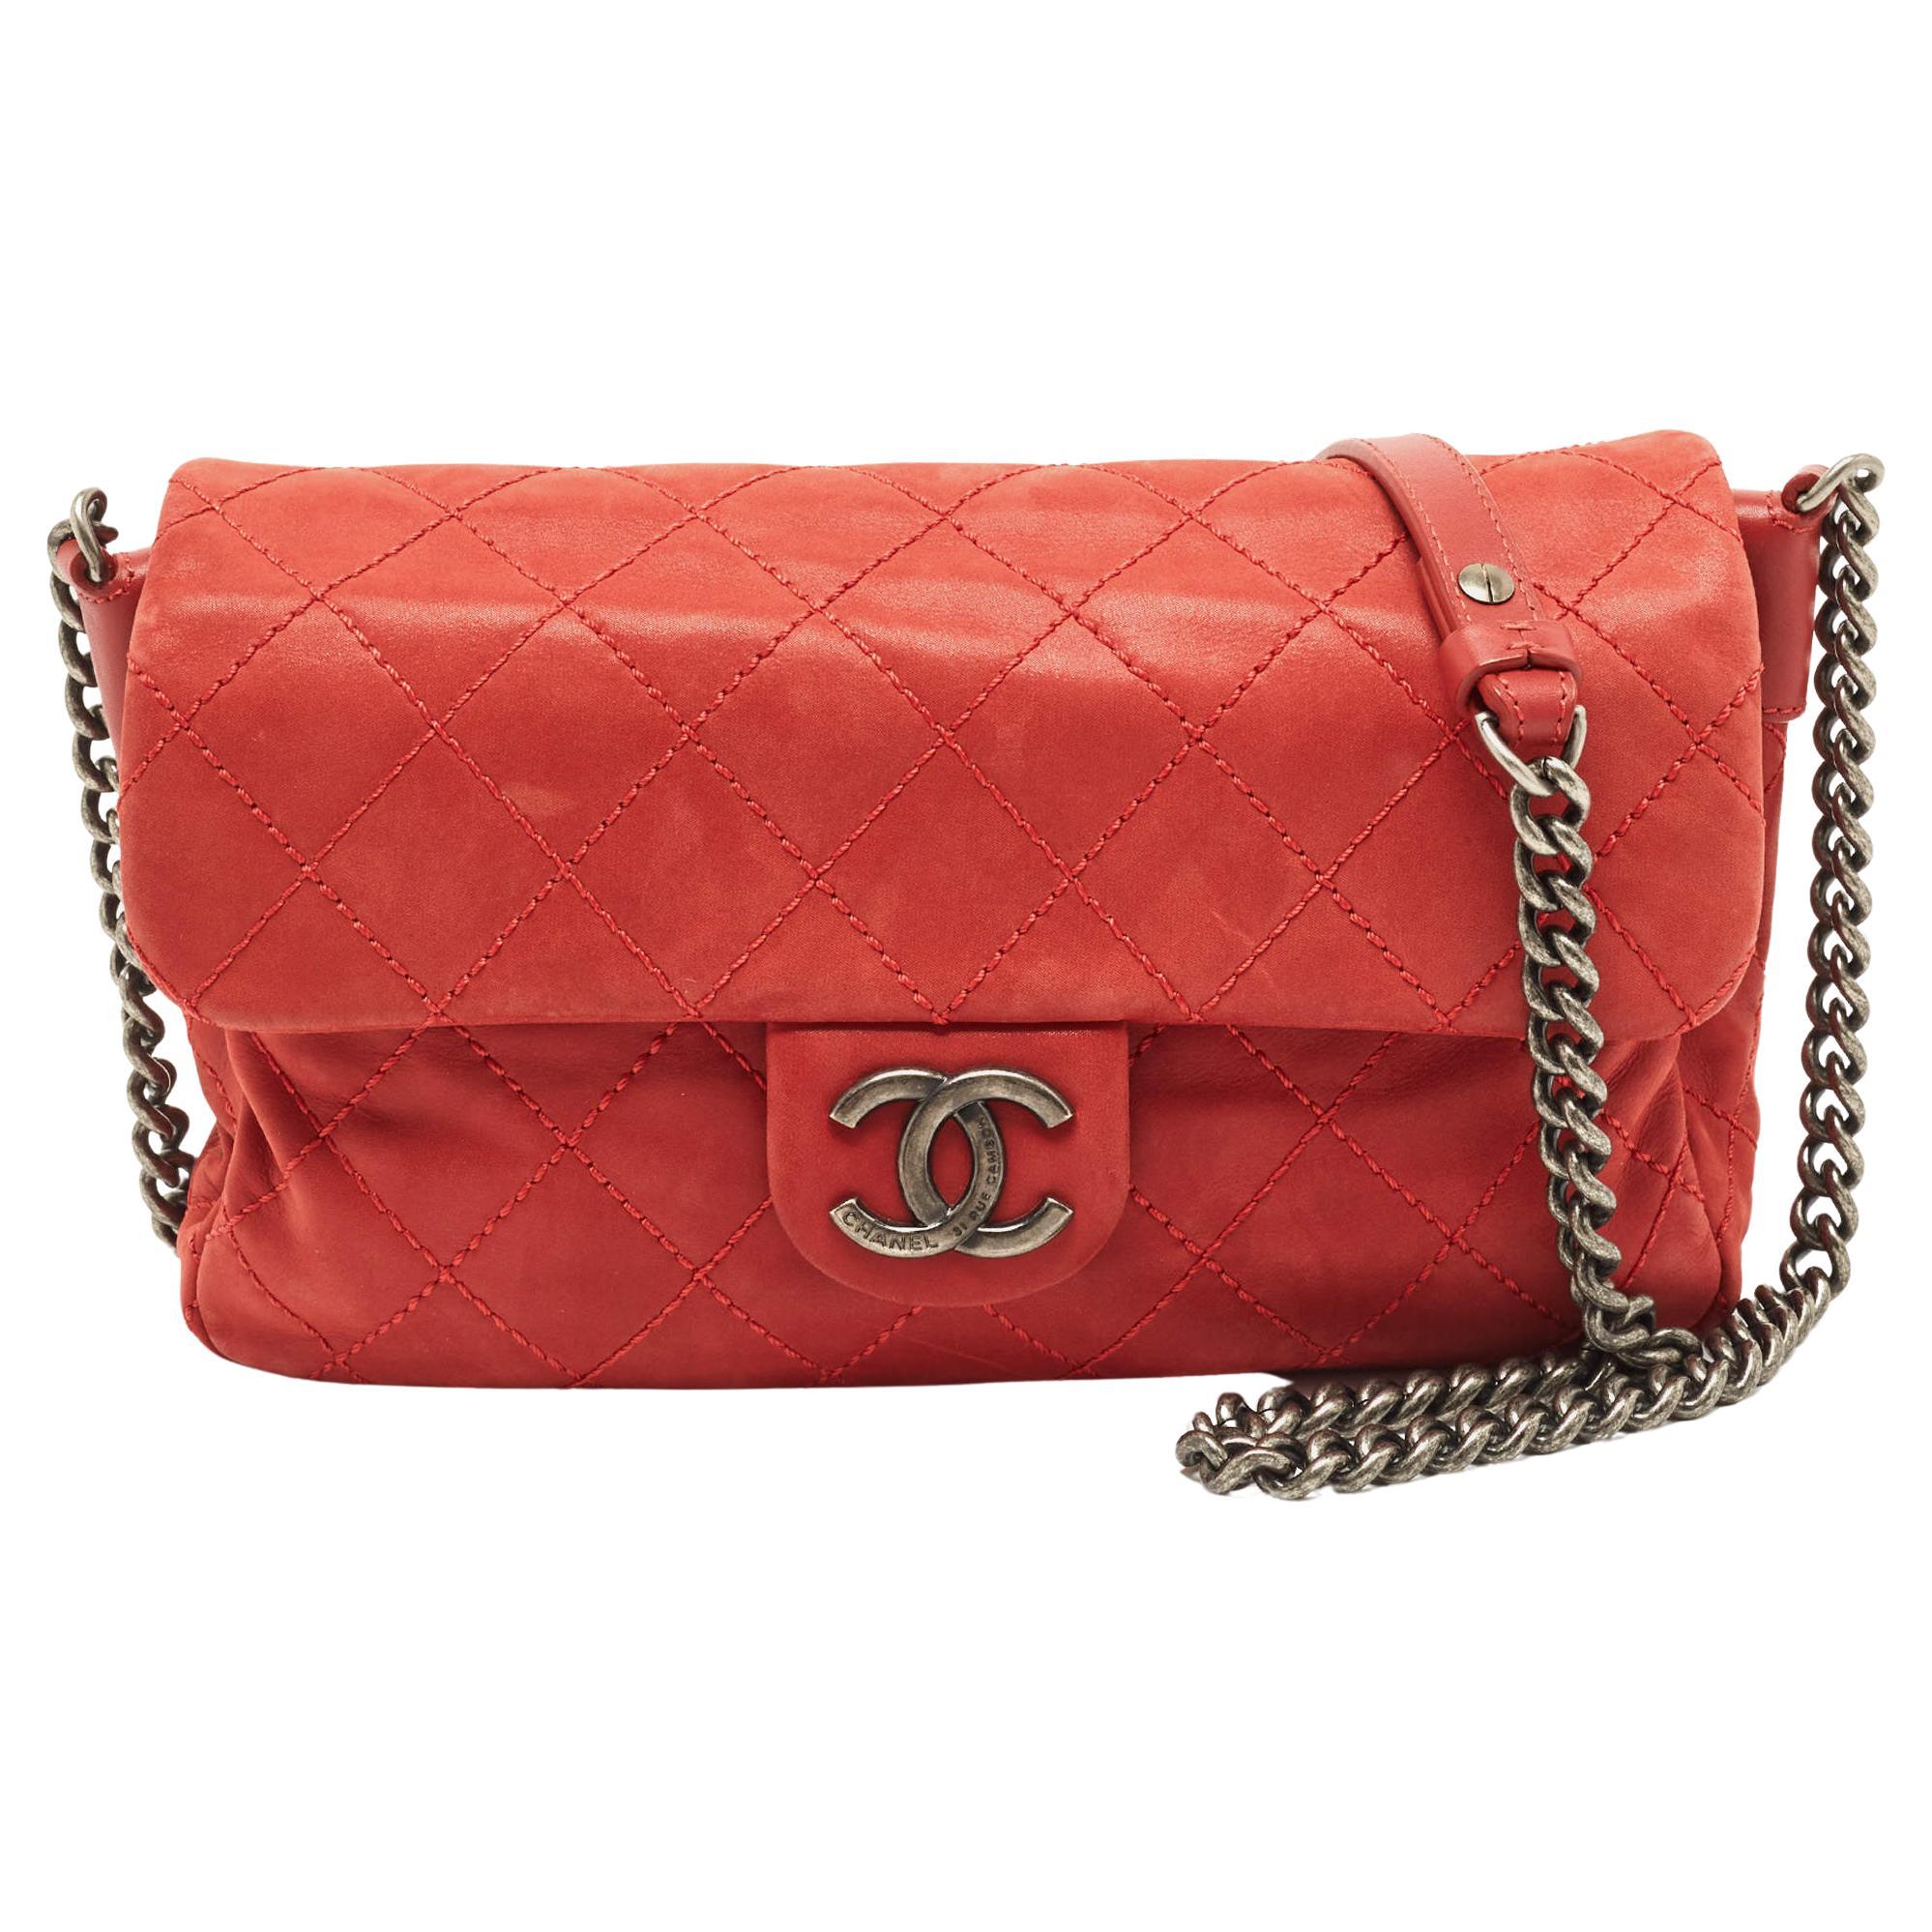 Chanel Red Quilted Iridescent Leather CC Flap Crossbody Bag For Sale